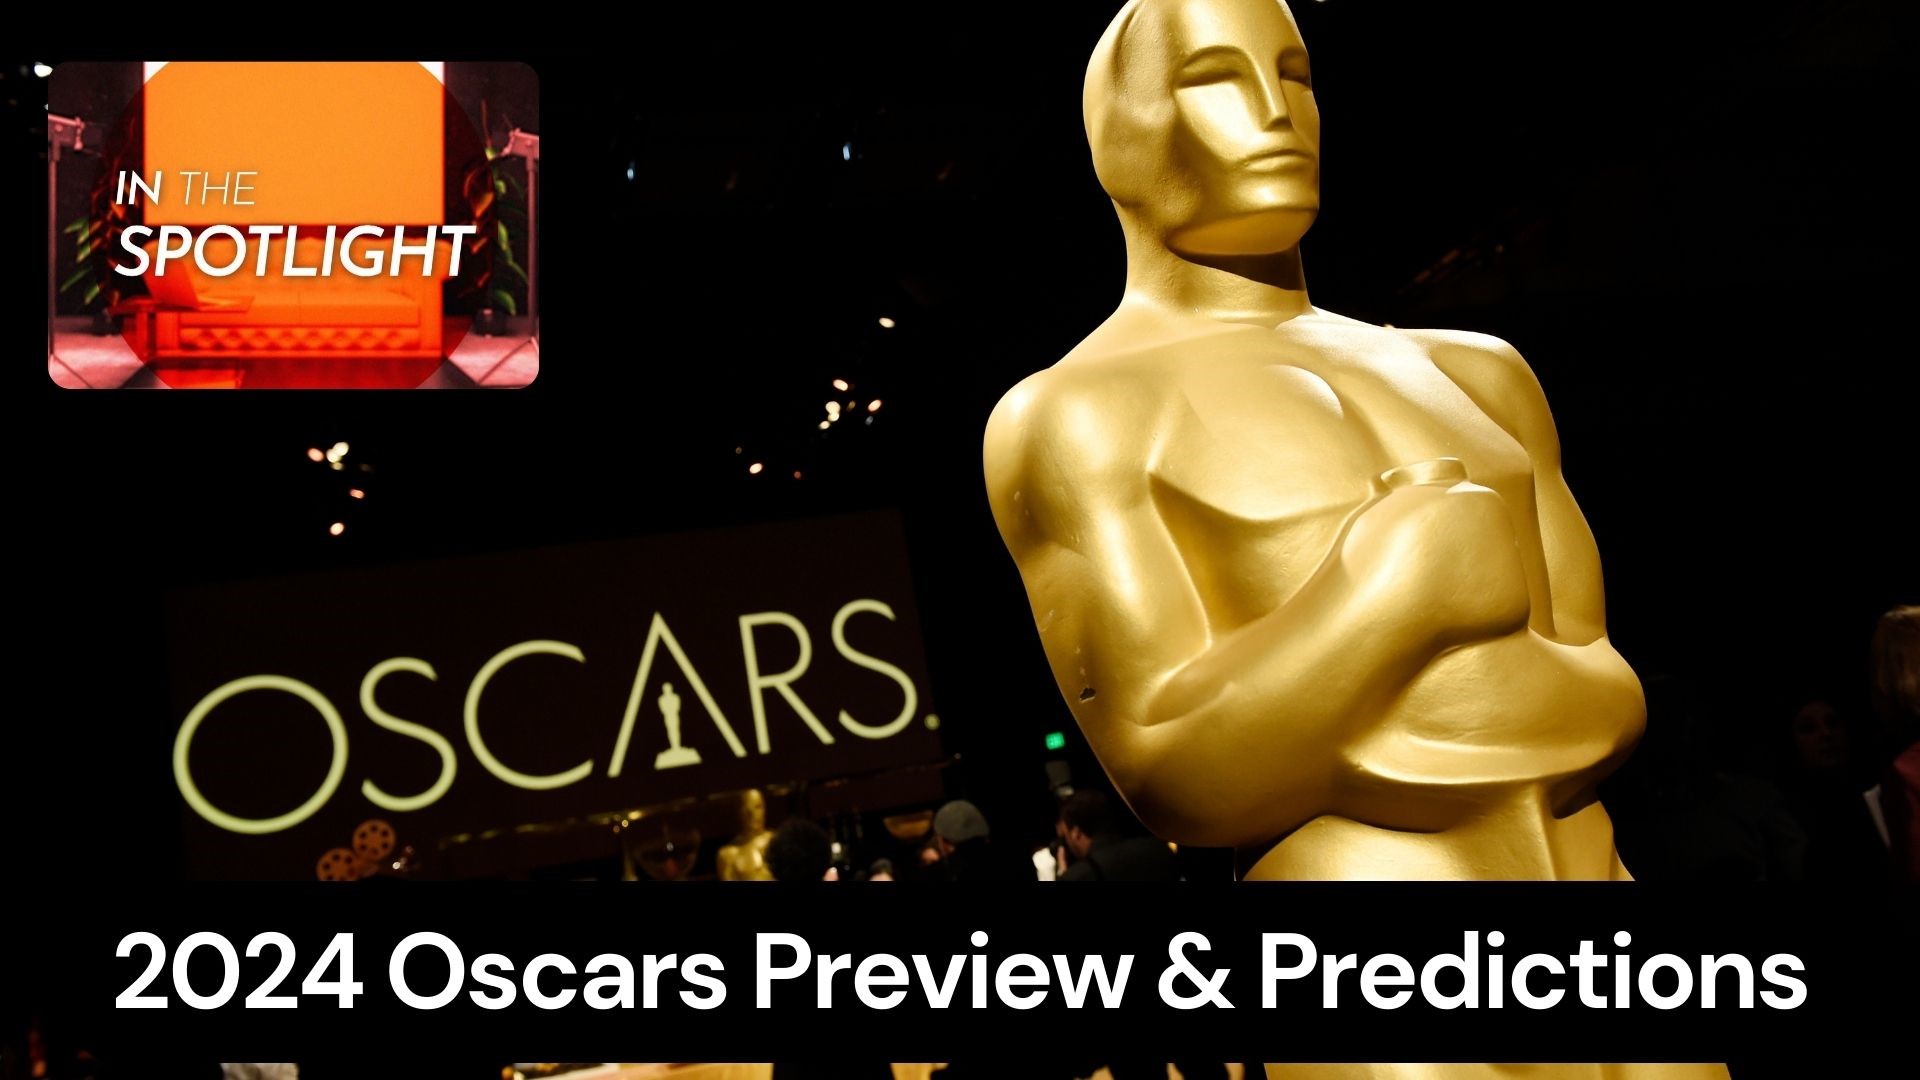 The 96th Academy Awards ceremony is almost here. A look at what to expect, as well as Oscar winner predictions. Plus, a closer look at one best picture nominee.